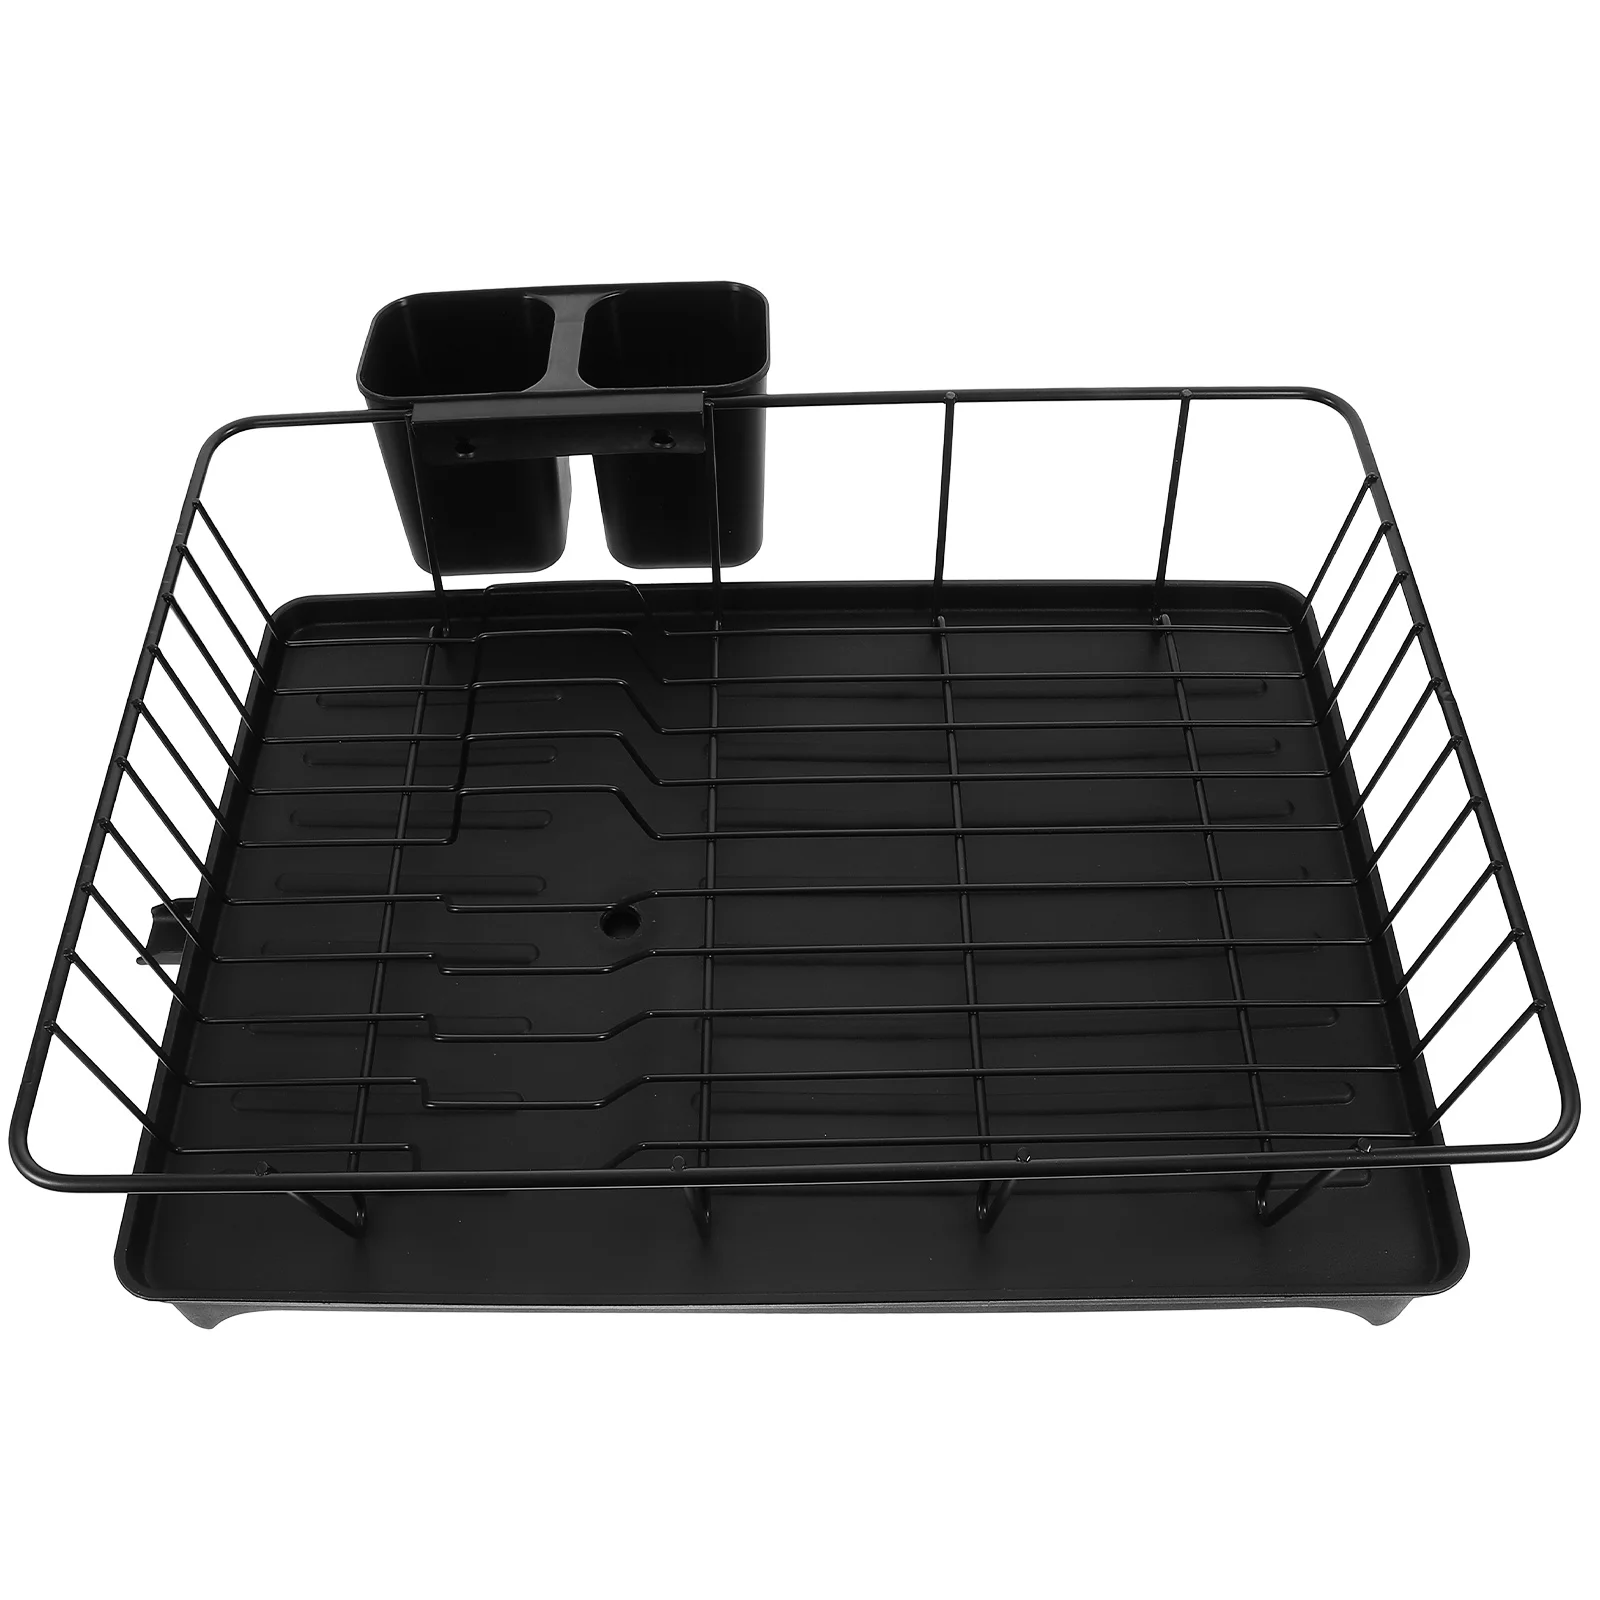 

Flatware Large Dish Drying Rack Dishes Plate Kitchen Counter Iron Racks Cutlery Holder Drainer